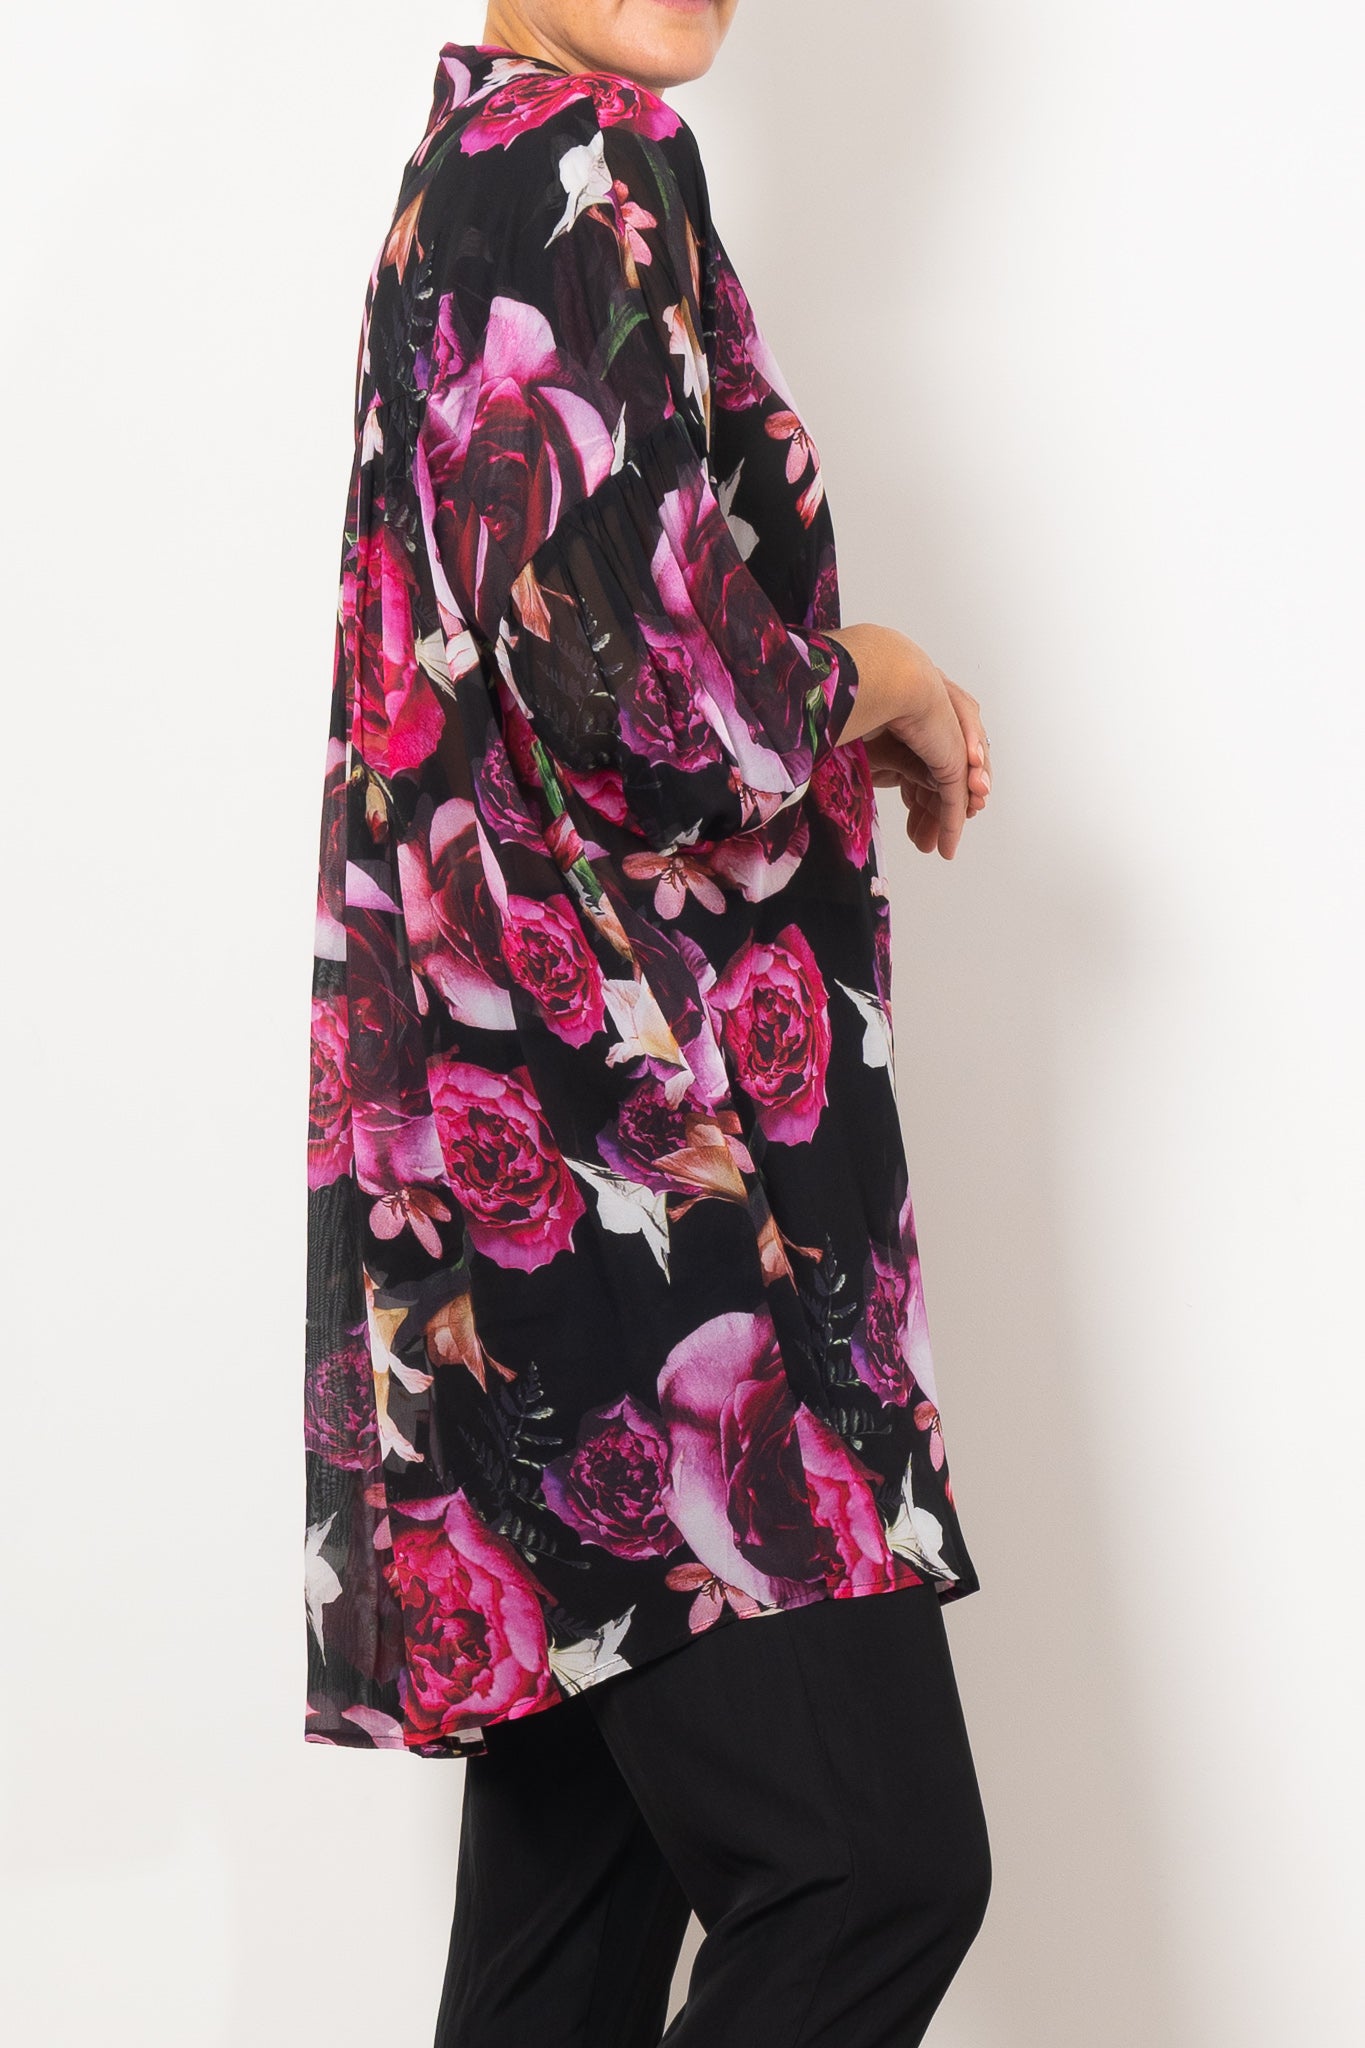 Curate by Trelise Cooper Something Borrowed Shirt